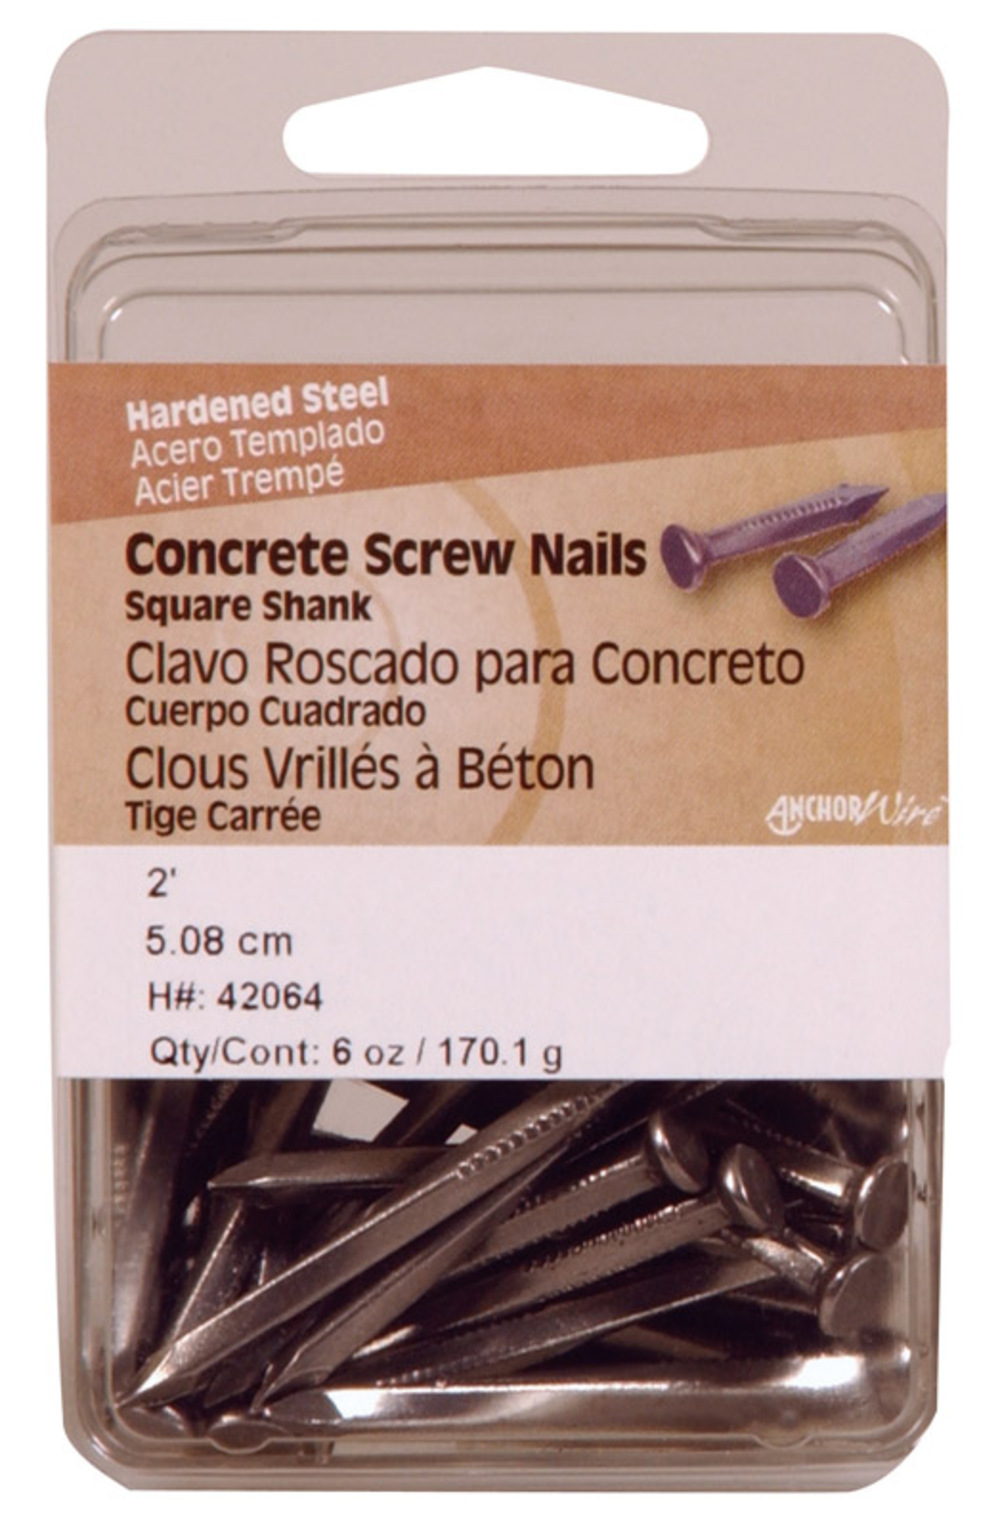 Hillman Concrete Screw Nails 2 " Square Steel Clamshell Pack of 5 - image 2 of 2